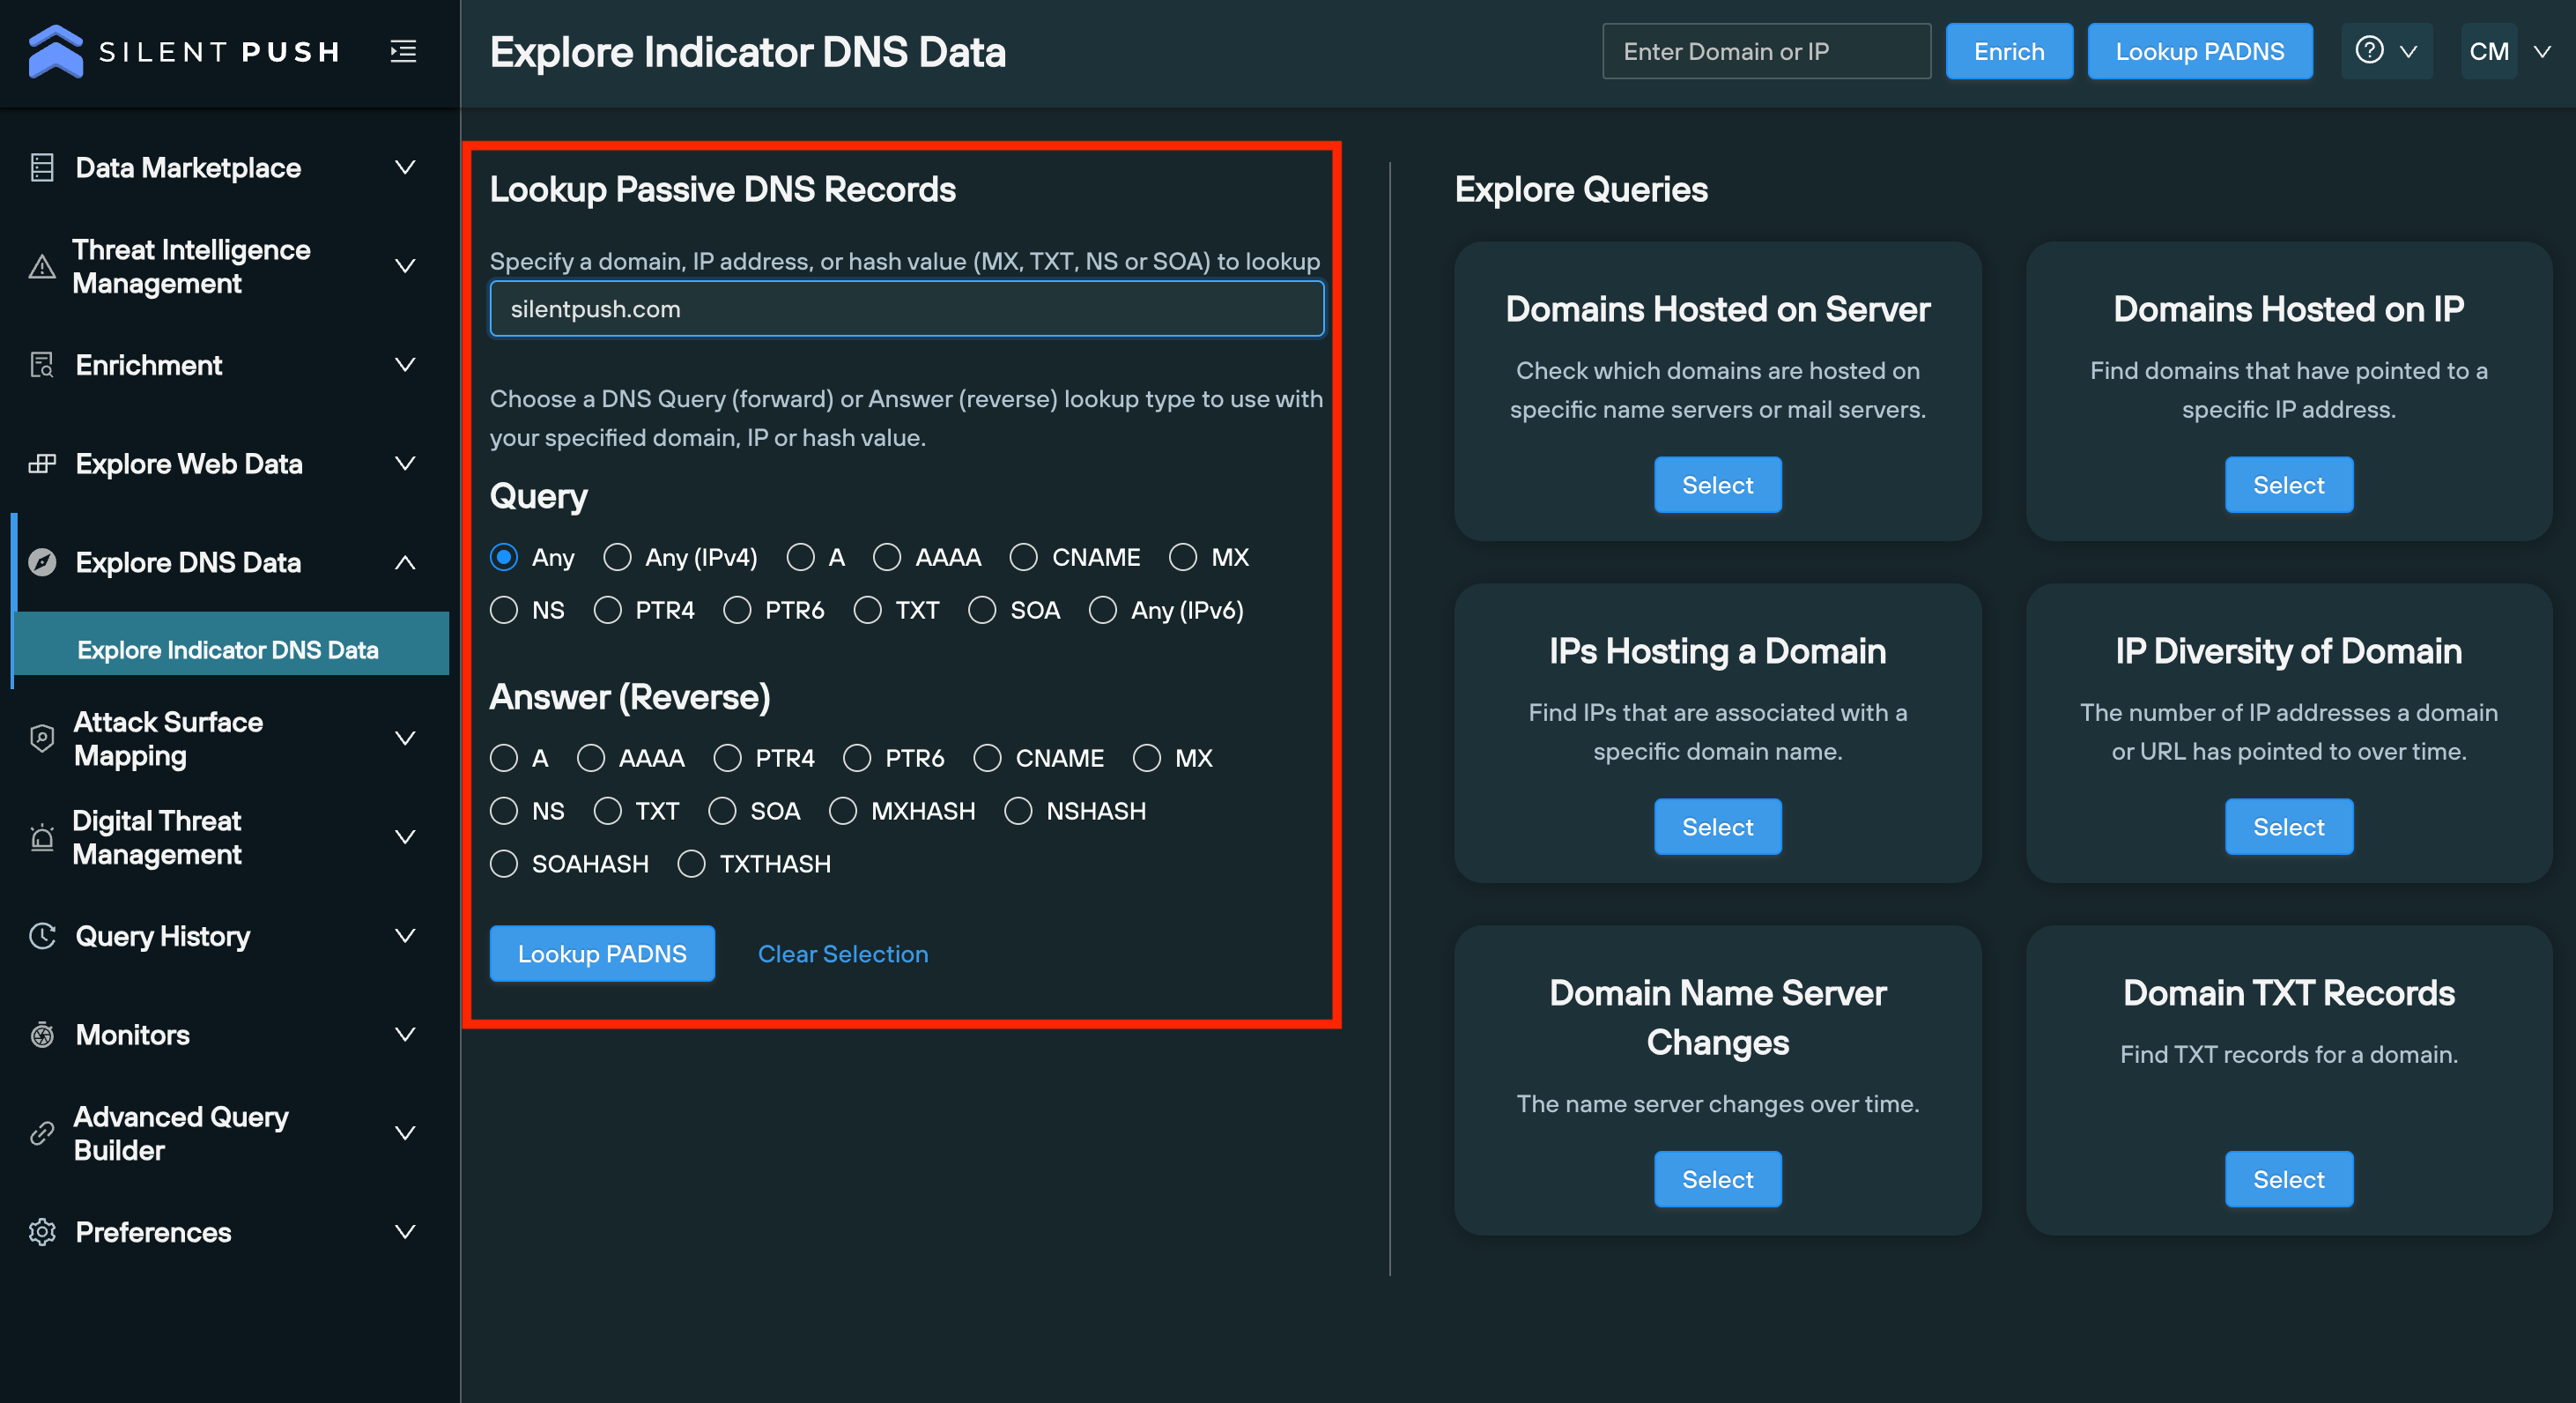 the explore indicator dns data page allows you to enrich data and execute advanced queries